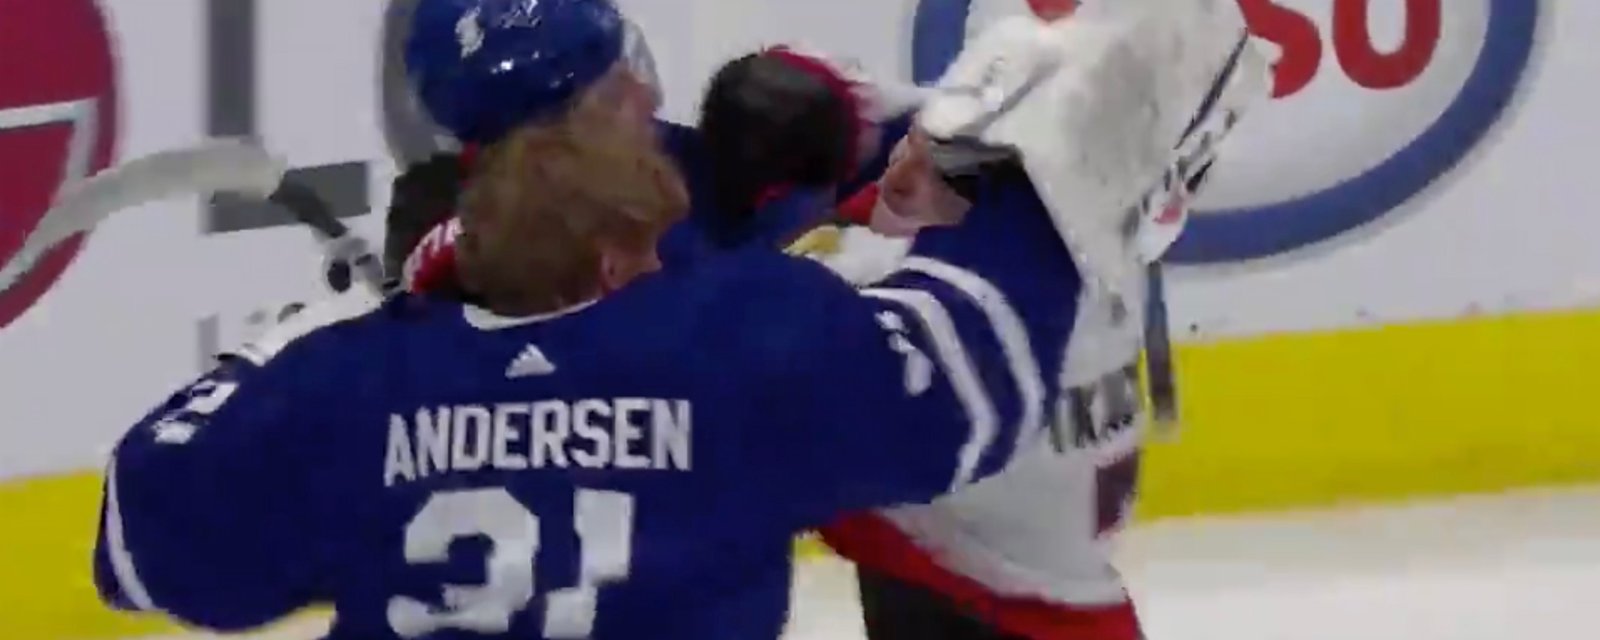 Leafs’ Andersen and Muzzin go after Tkachuk, who fights back with bombs!